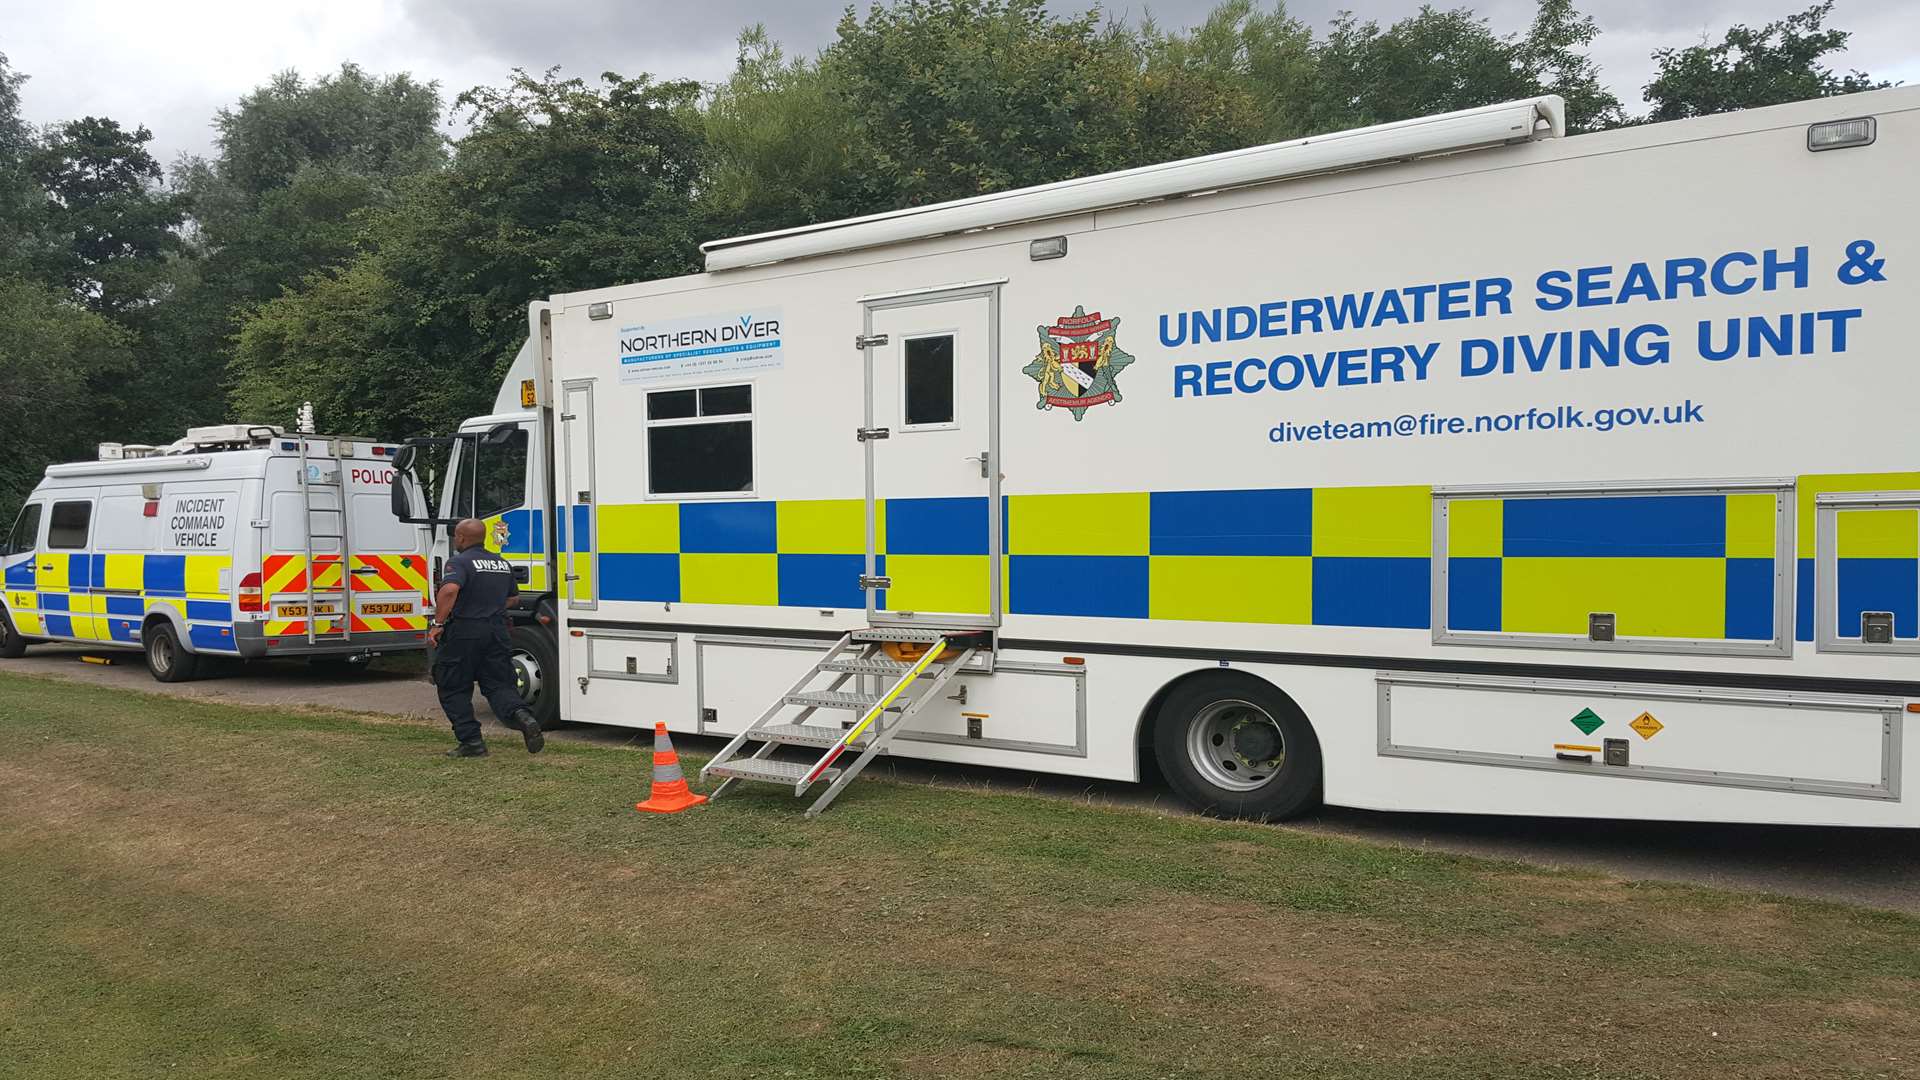 The underwater search and rescue unit has been drafted in